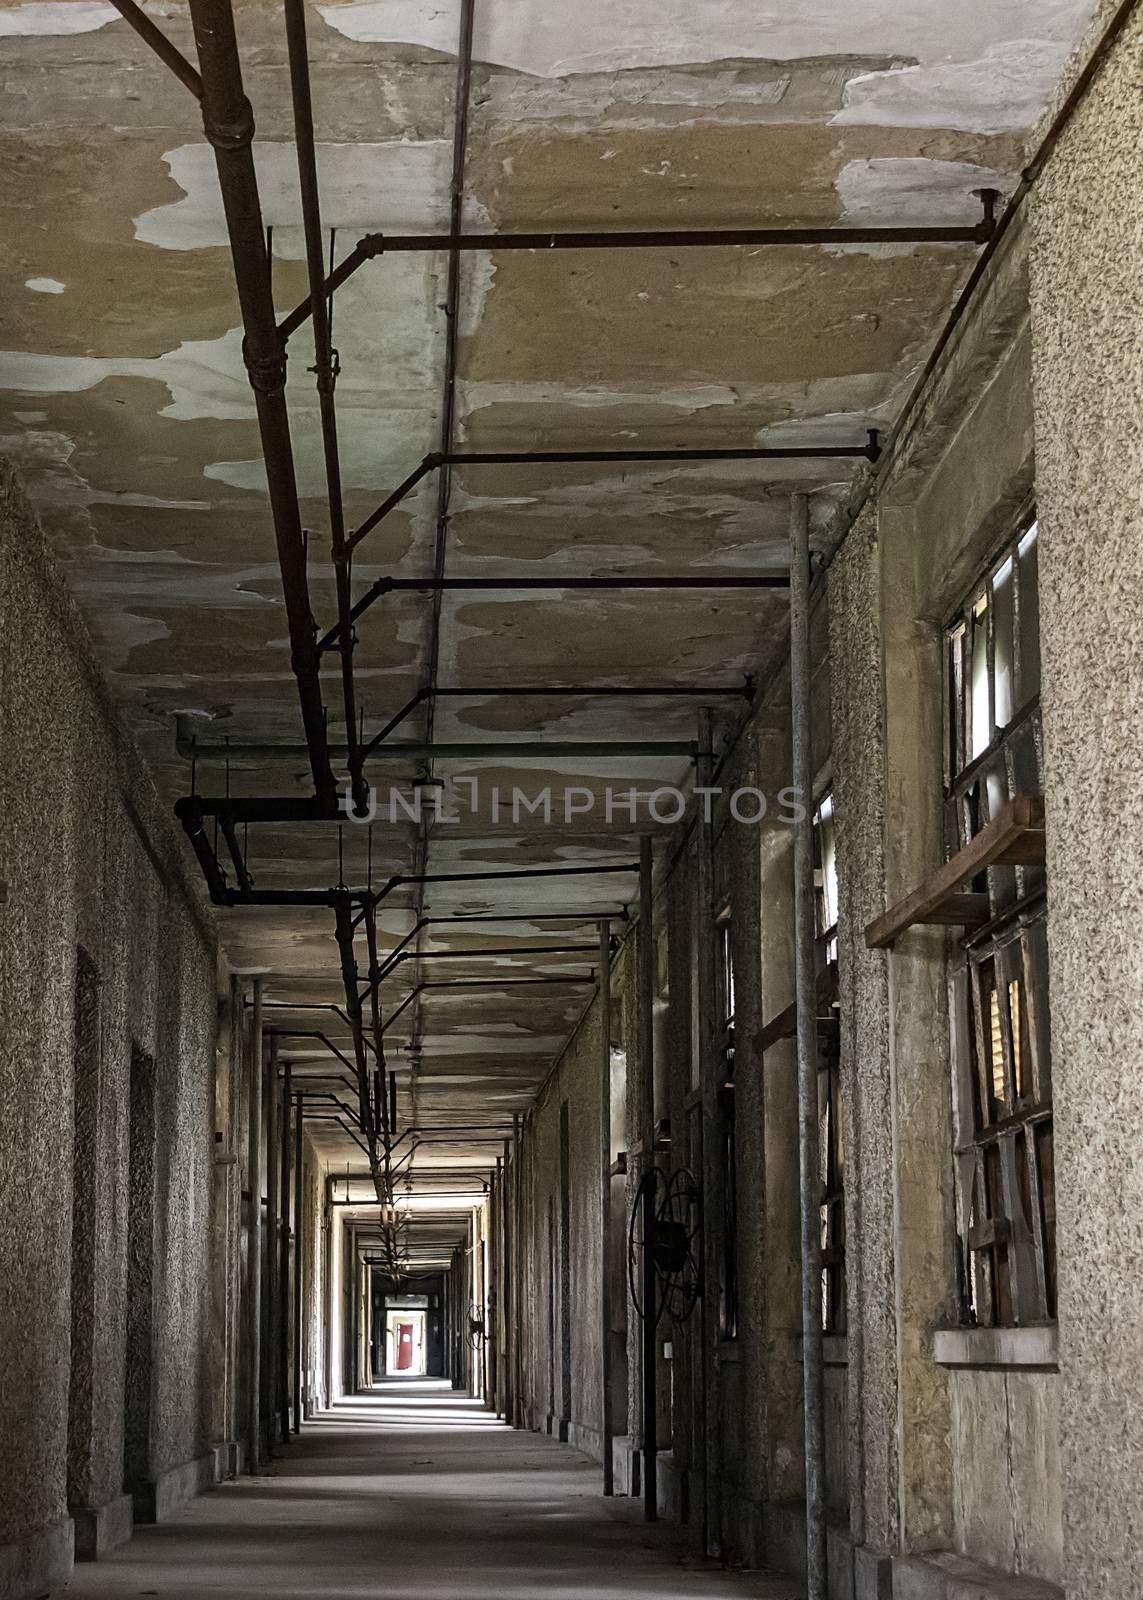 ecayed corridor in an abandoned hospital by mrs_vision